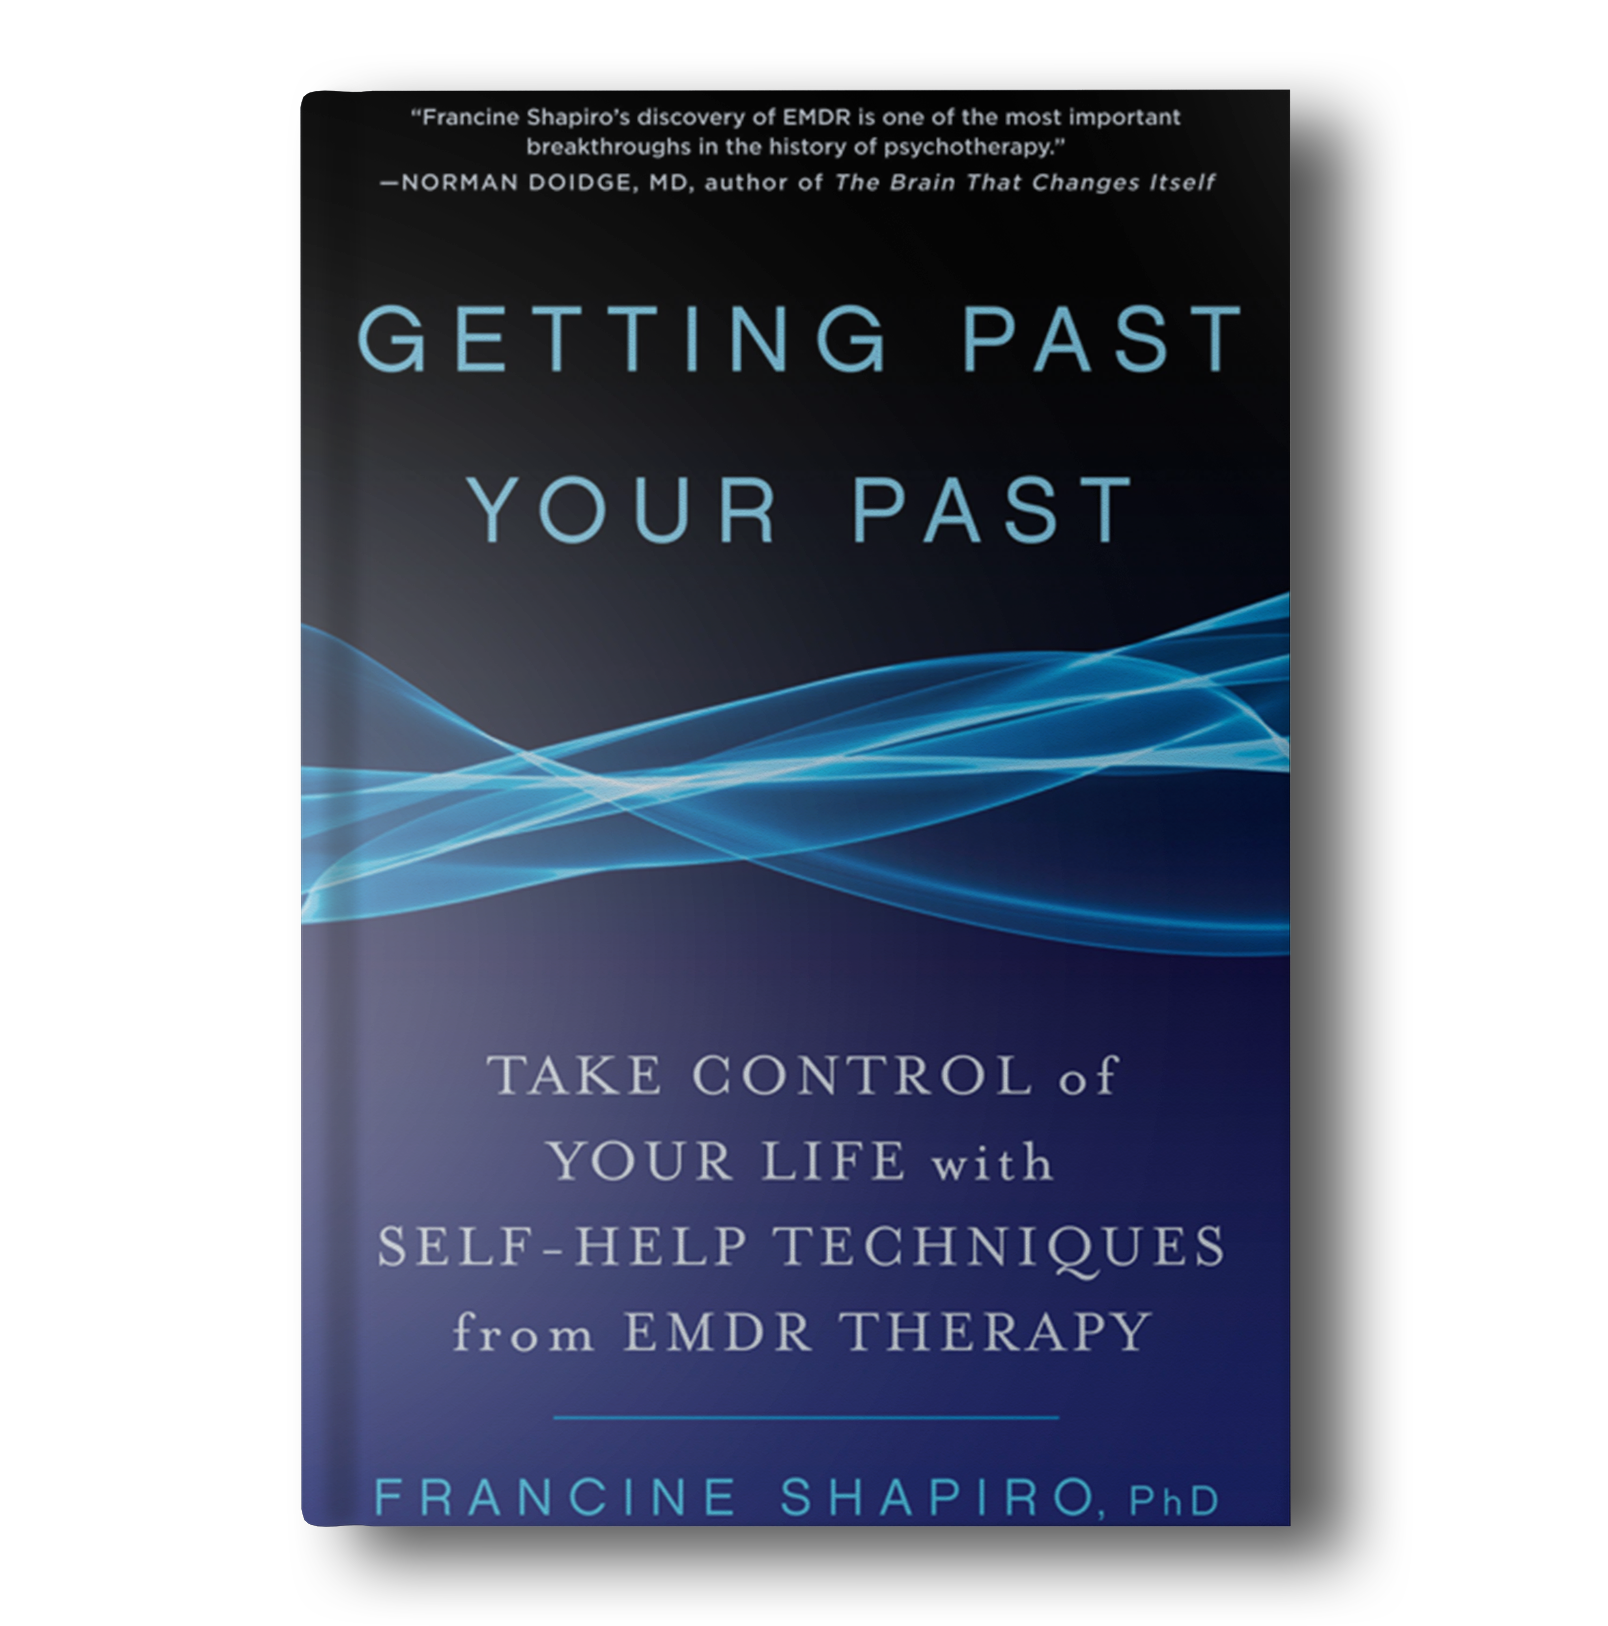 getting-past-your-past-hard-copy-book-2